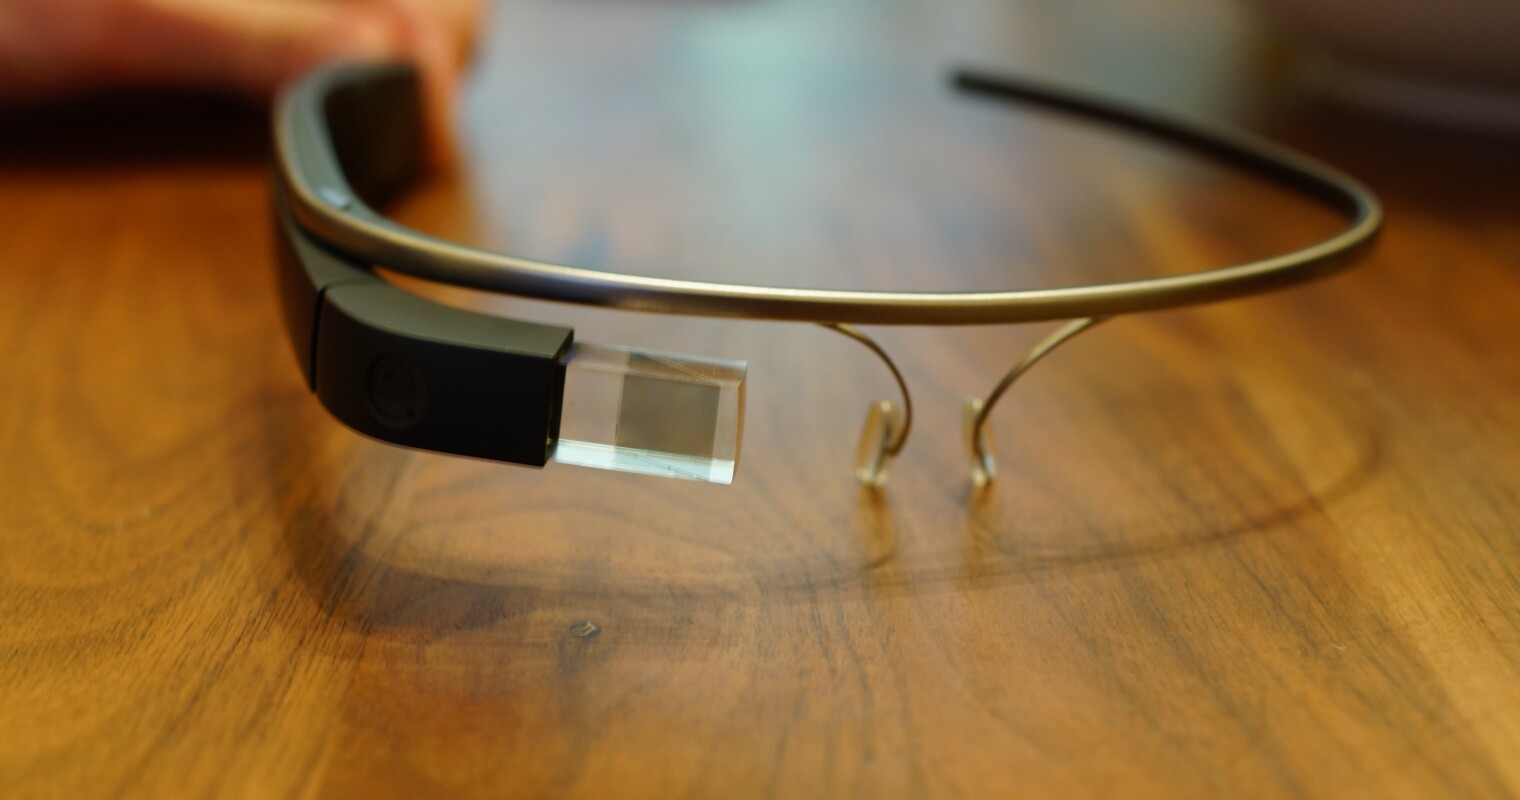 Google Glass Gets Improved Search Capabilities With New Software Update